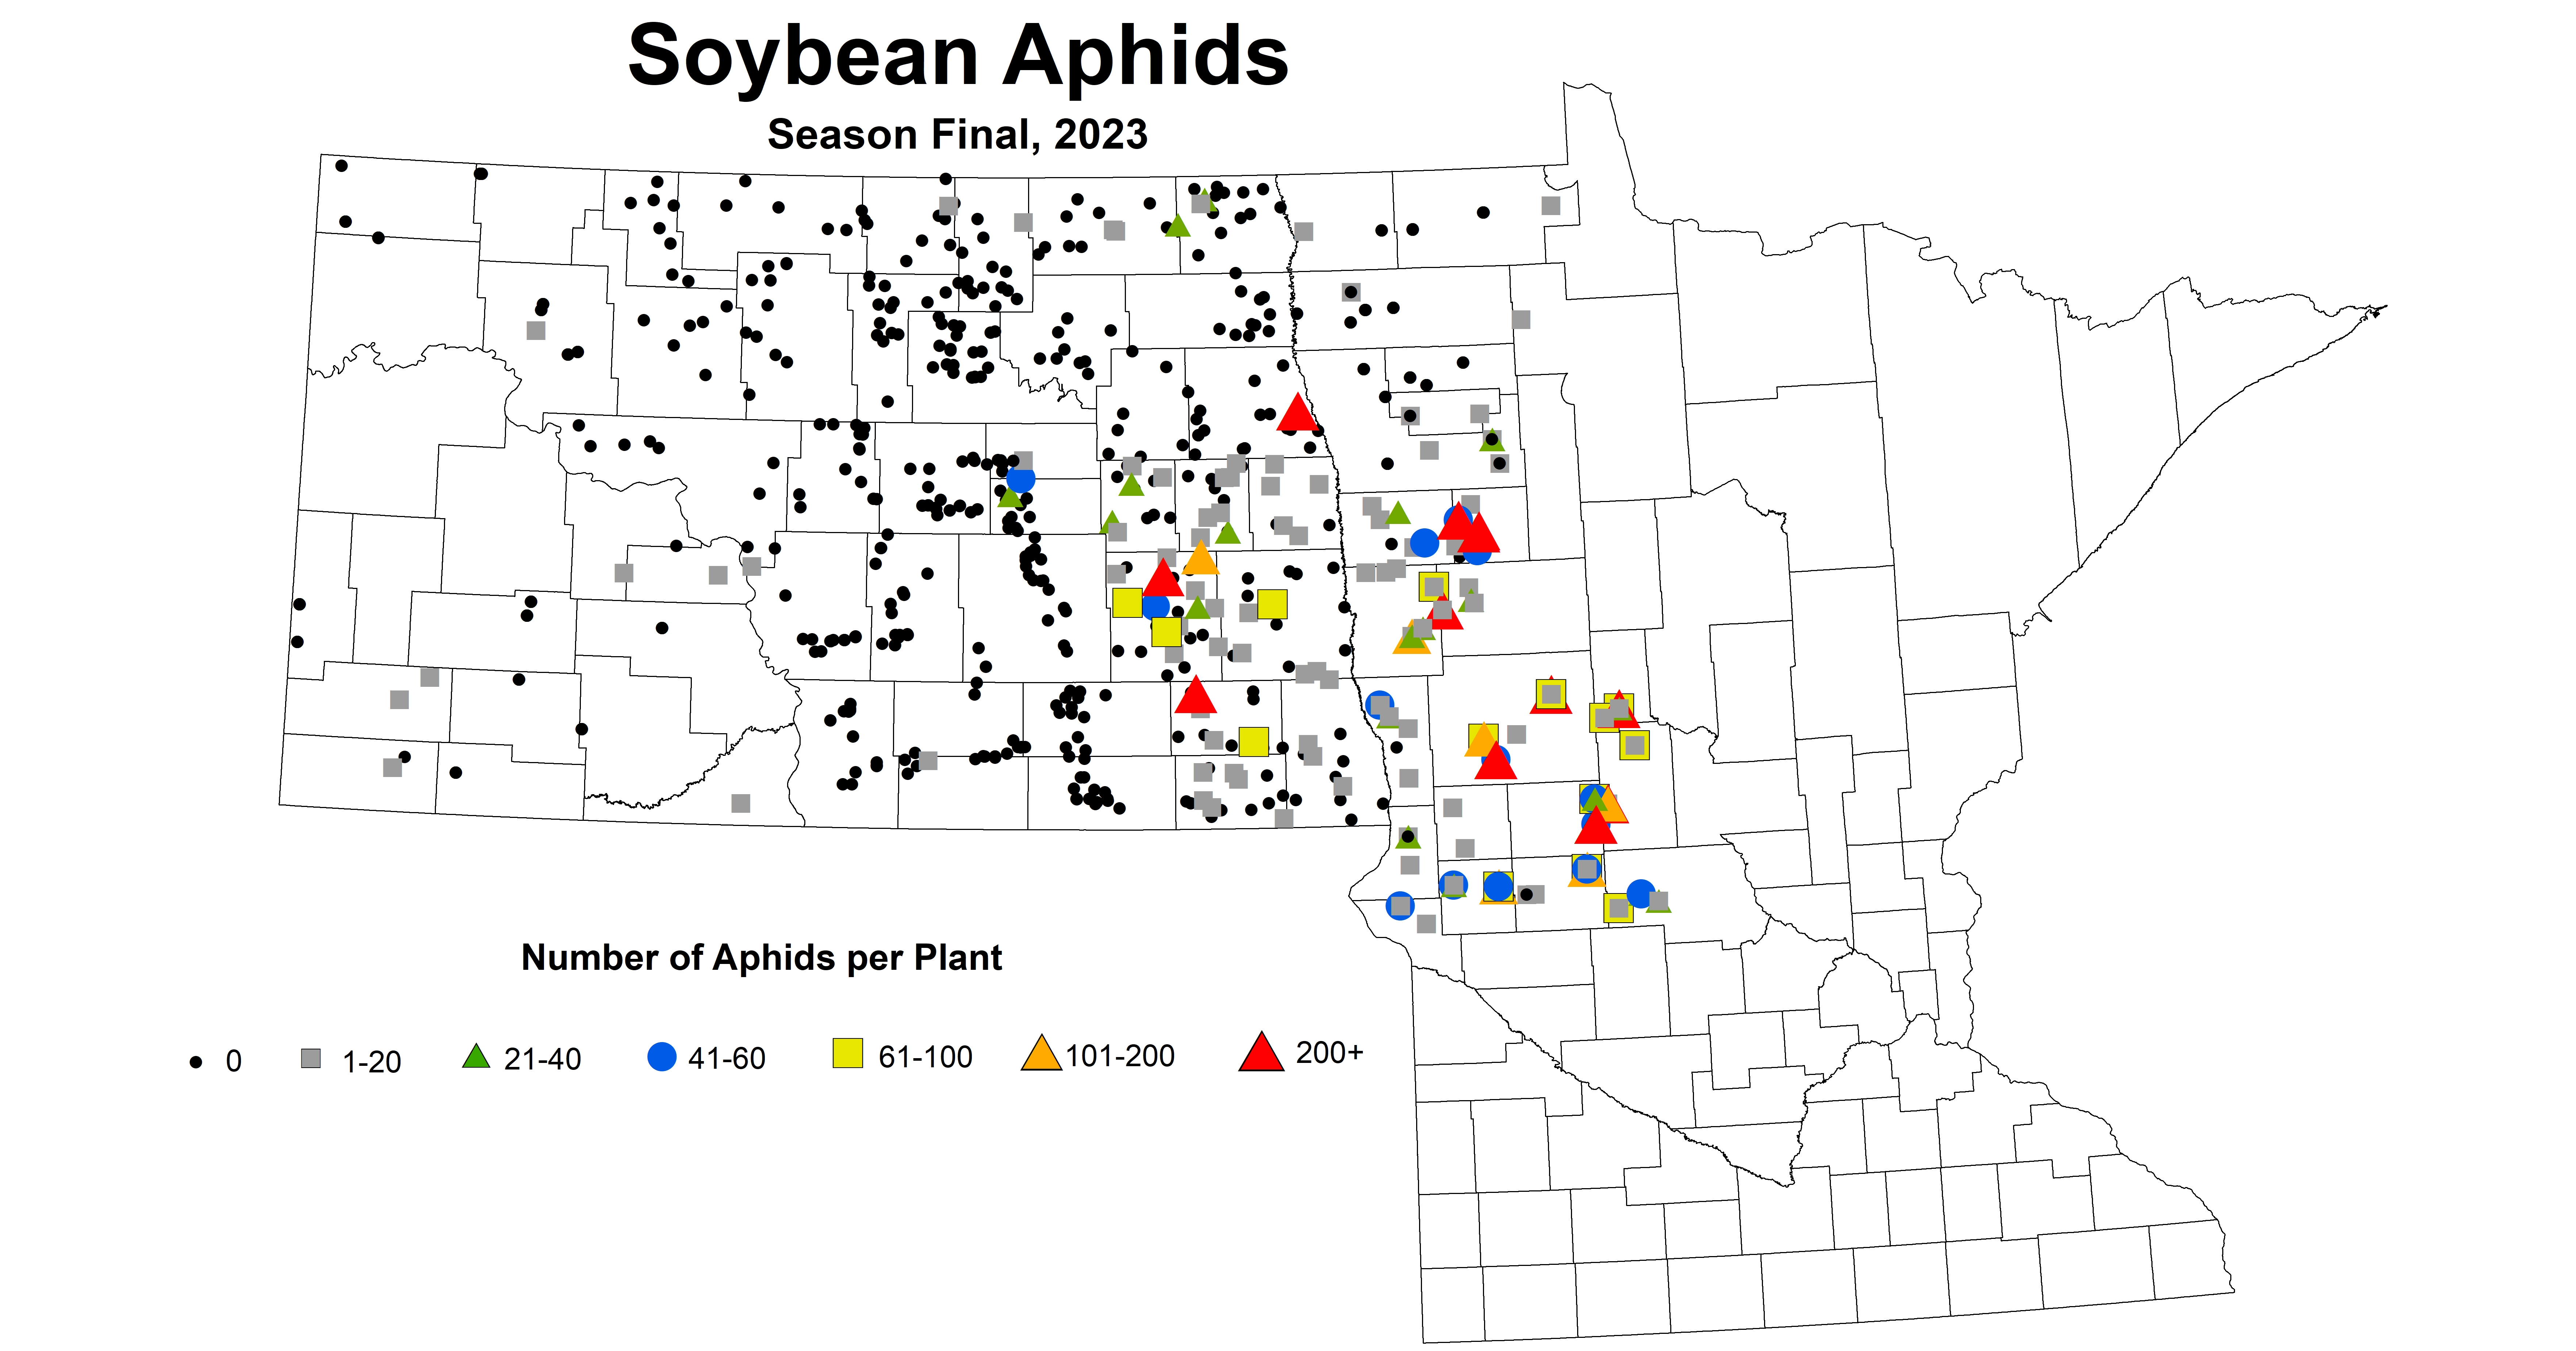 soybean aphids number season final 2023